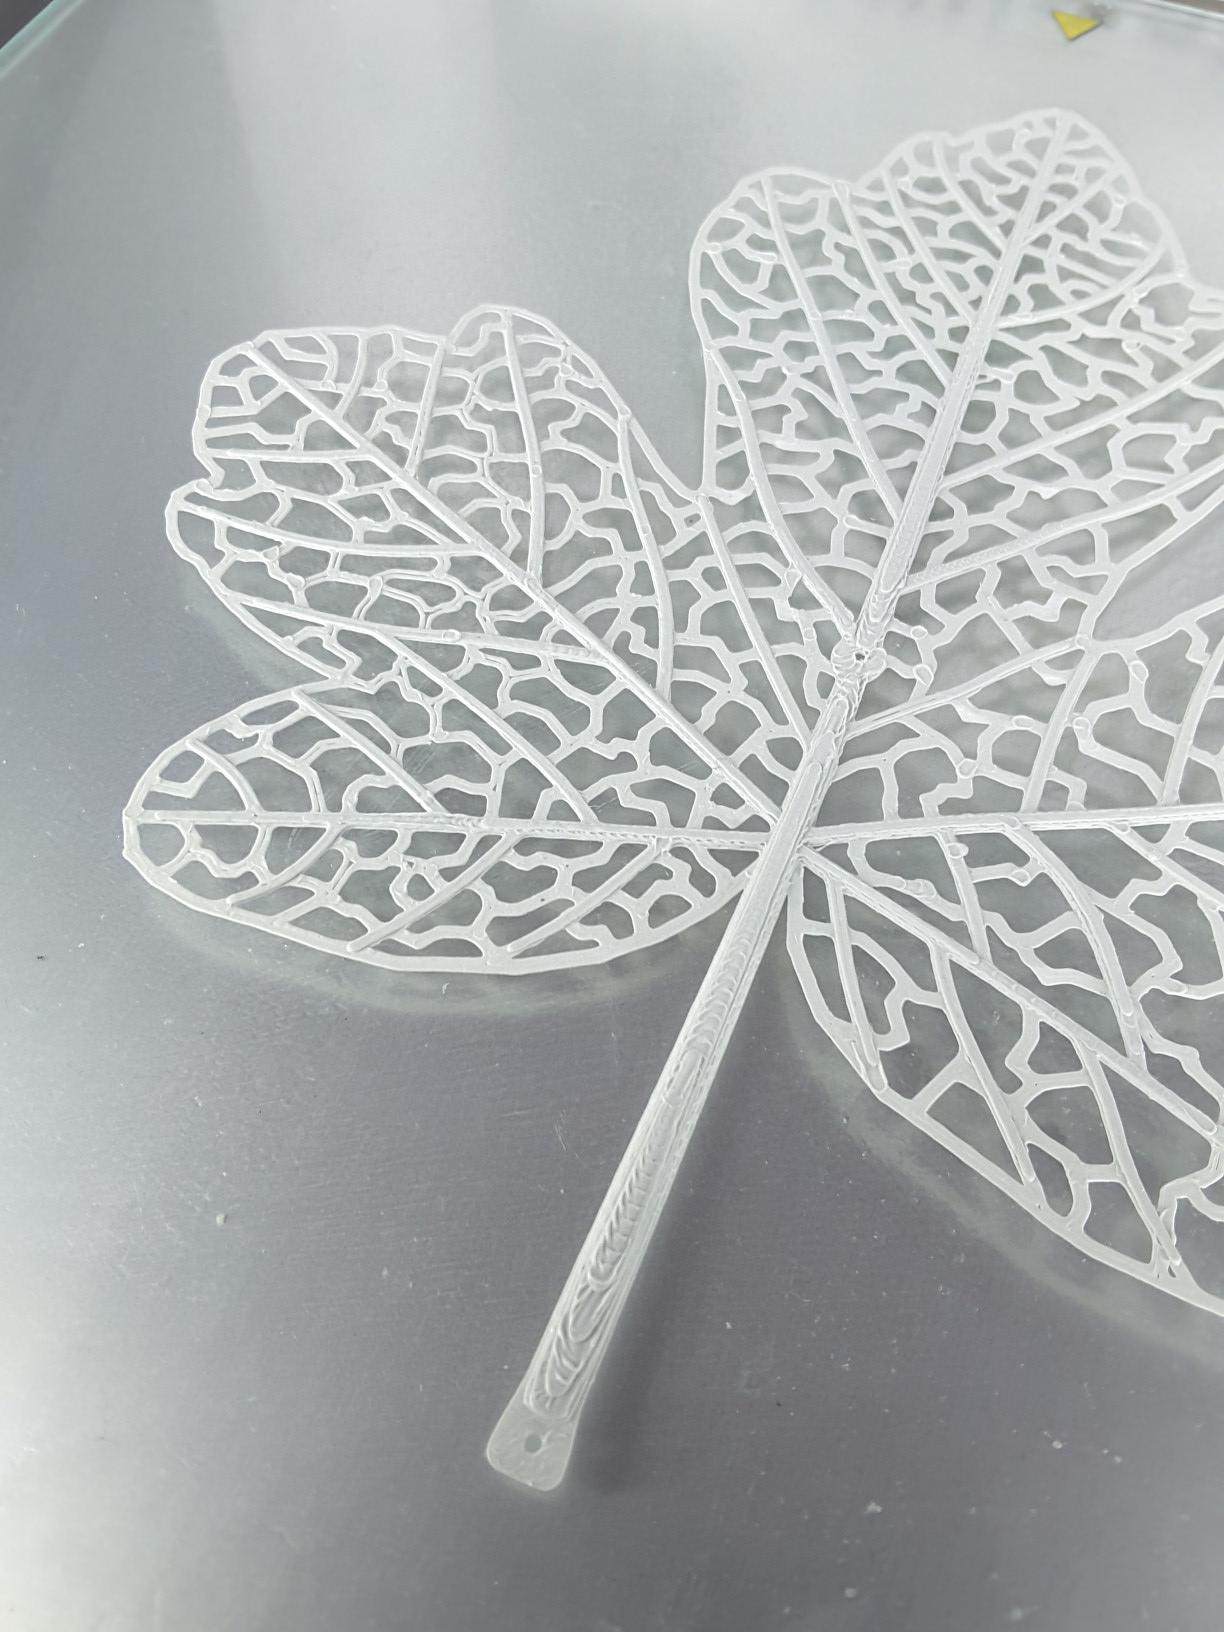 3D Printed Floating Christmas Made Recycled Plastic Highlights the Beauty and Fragility of Nature - 3DPrint.com | The Voice of 3D Printing / Additive Manufacturing